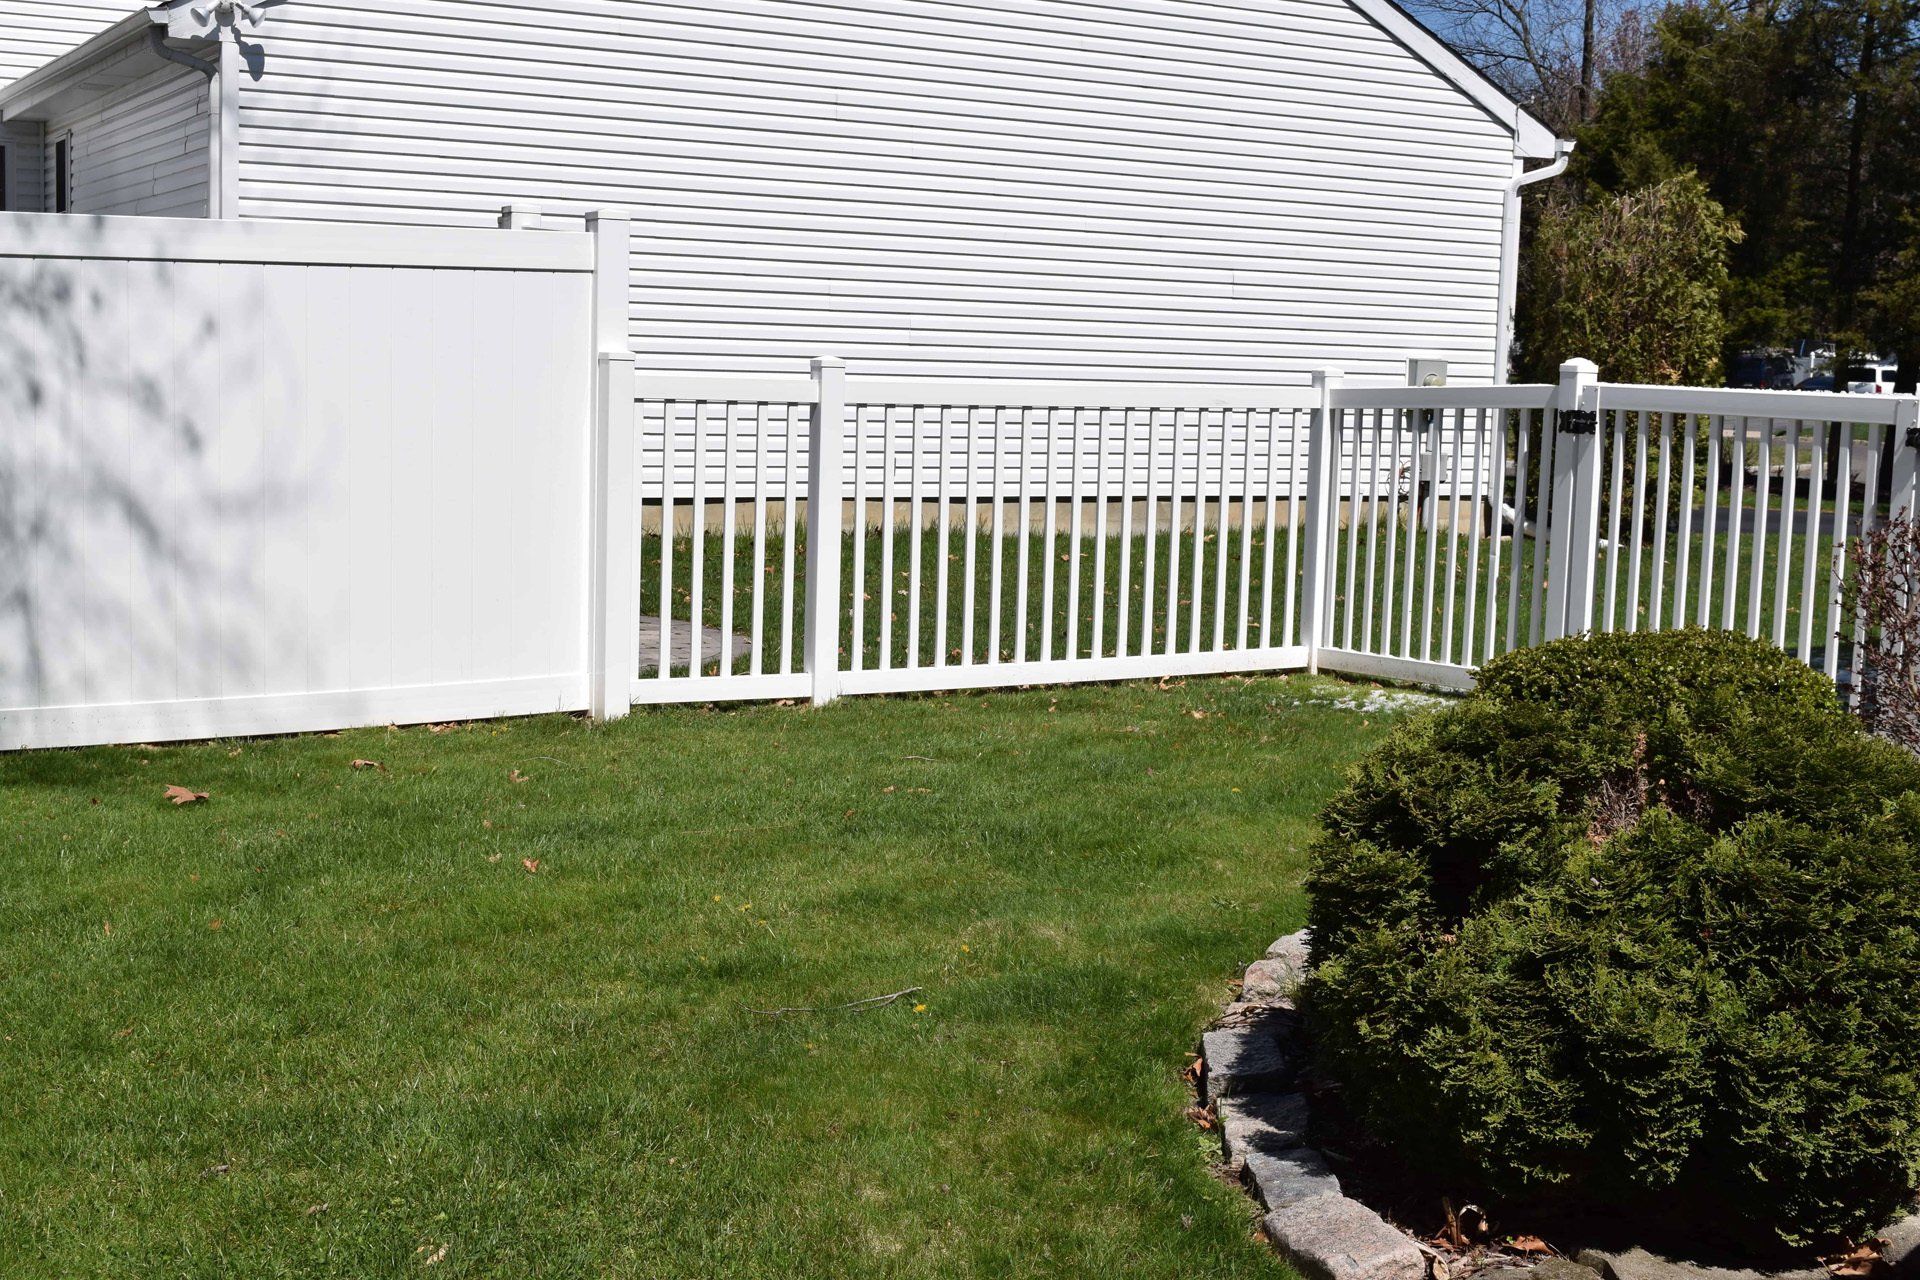 Aluminum fence is a decorative fencing solution